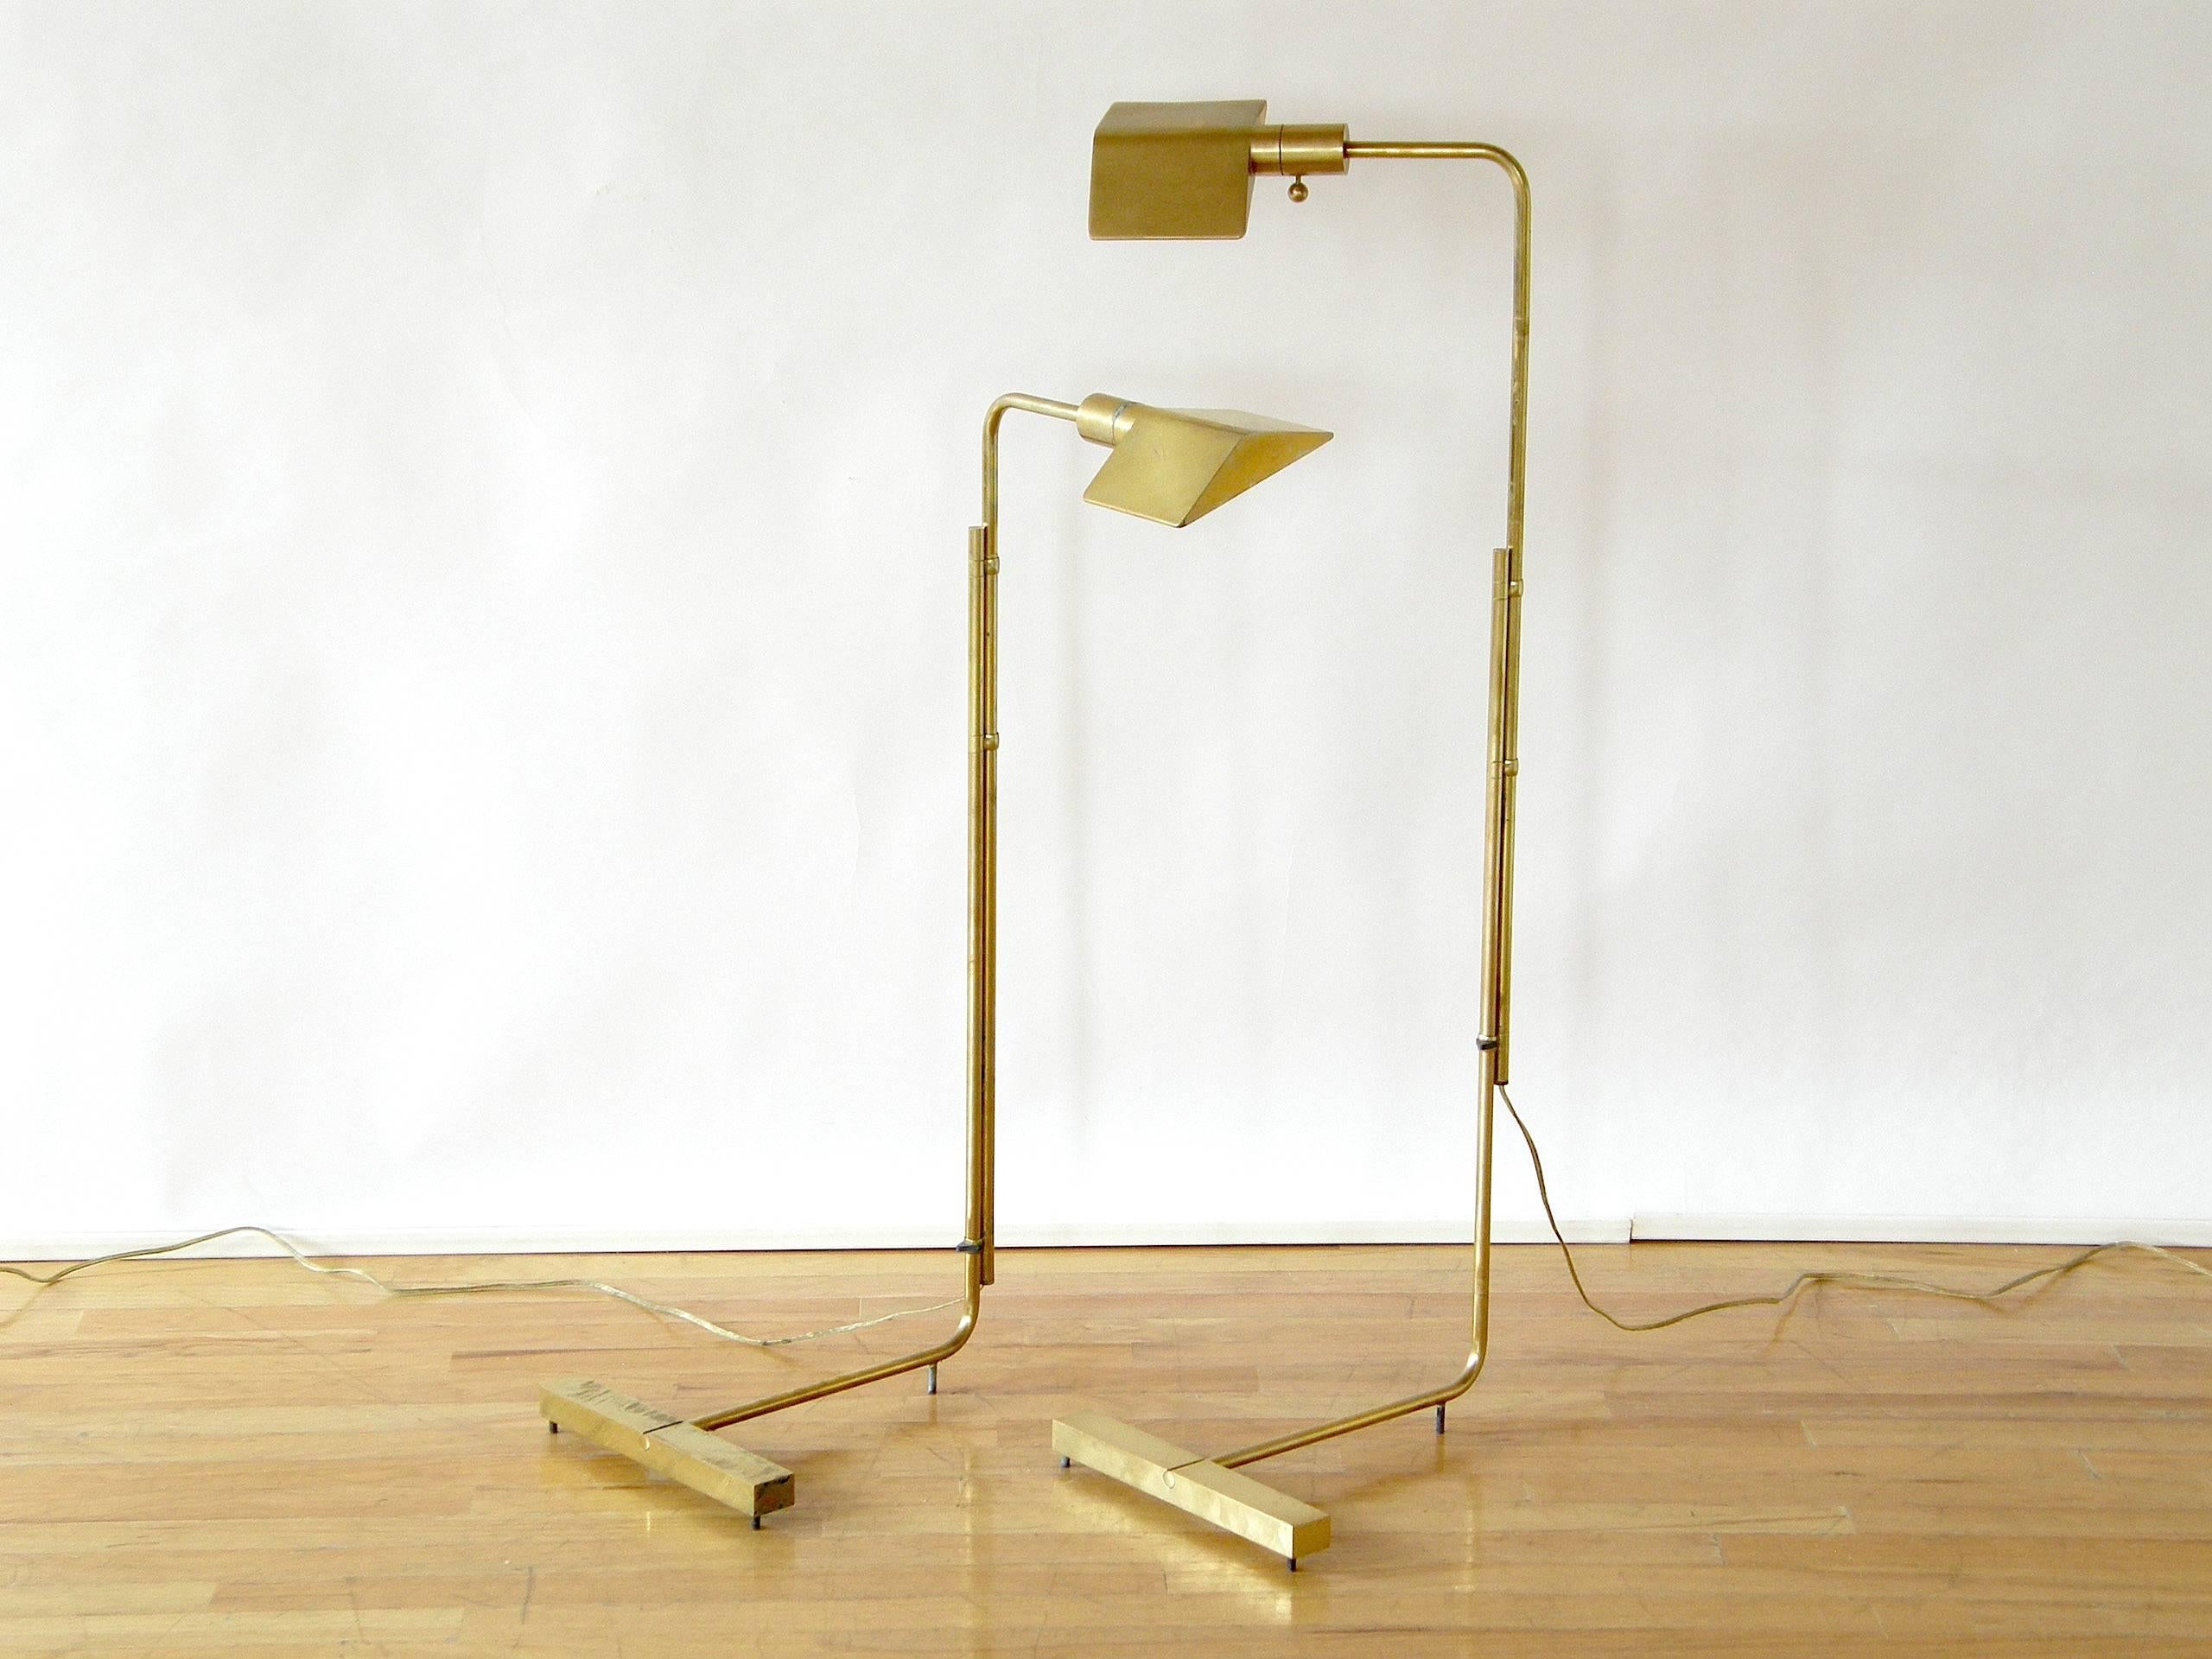 Classic, Minimalist lamp design by Cedric Hartman with an elegant simplicity. The base heights adjust, the stems swivel and the shades pivot to direct the light. The height given below is the maximum height. It can be adjusted to a low of 32.5